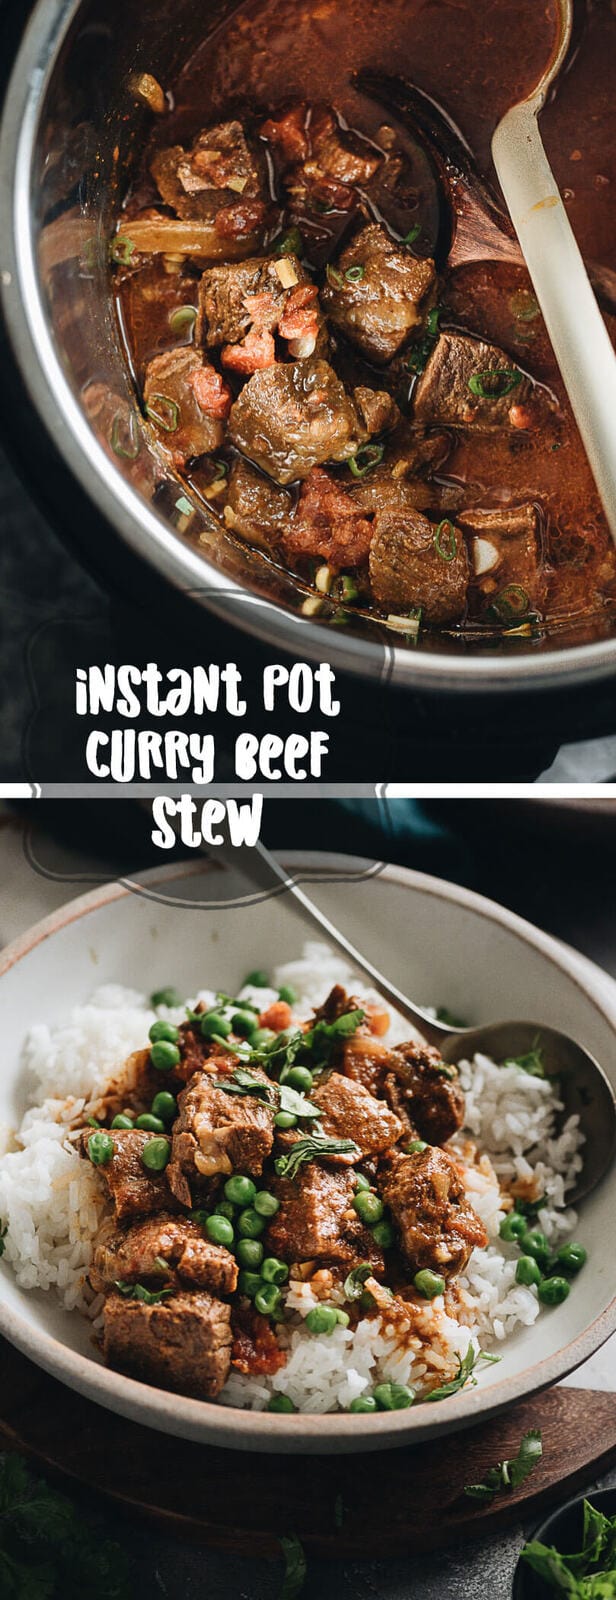 The easiest and quickest pressure cooker curry beef stew recipe that yields the best results. Simply dump everything into the pot and you’ll have melt-in-your-mouth beef smothered in a rich, thick tomato curry sauce. So irresistible! #GlutenFree #beef #instantpot #recipes